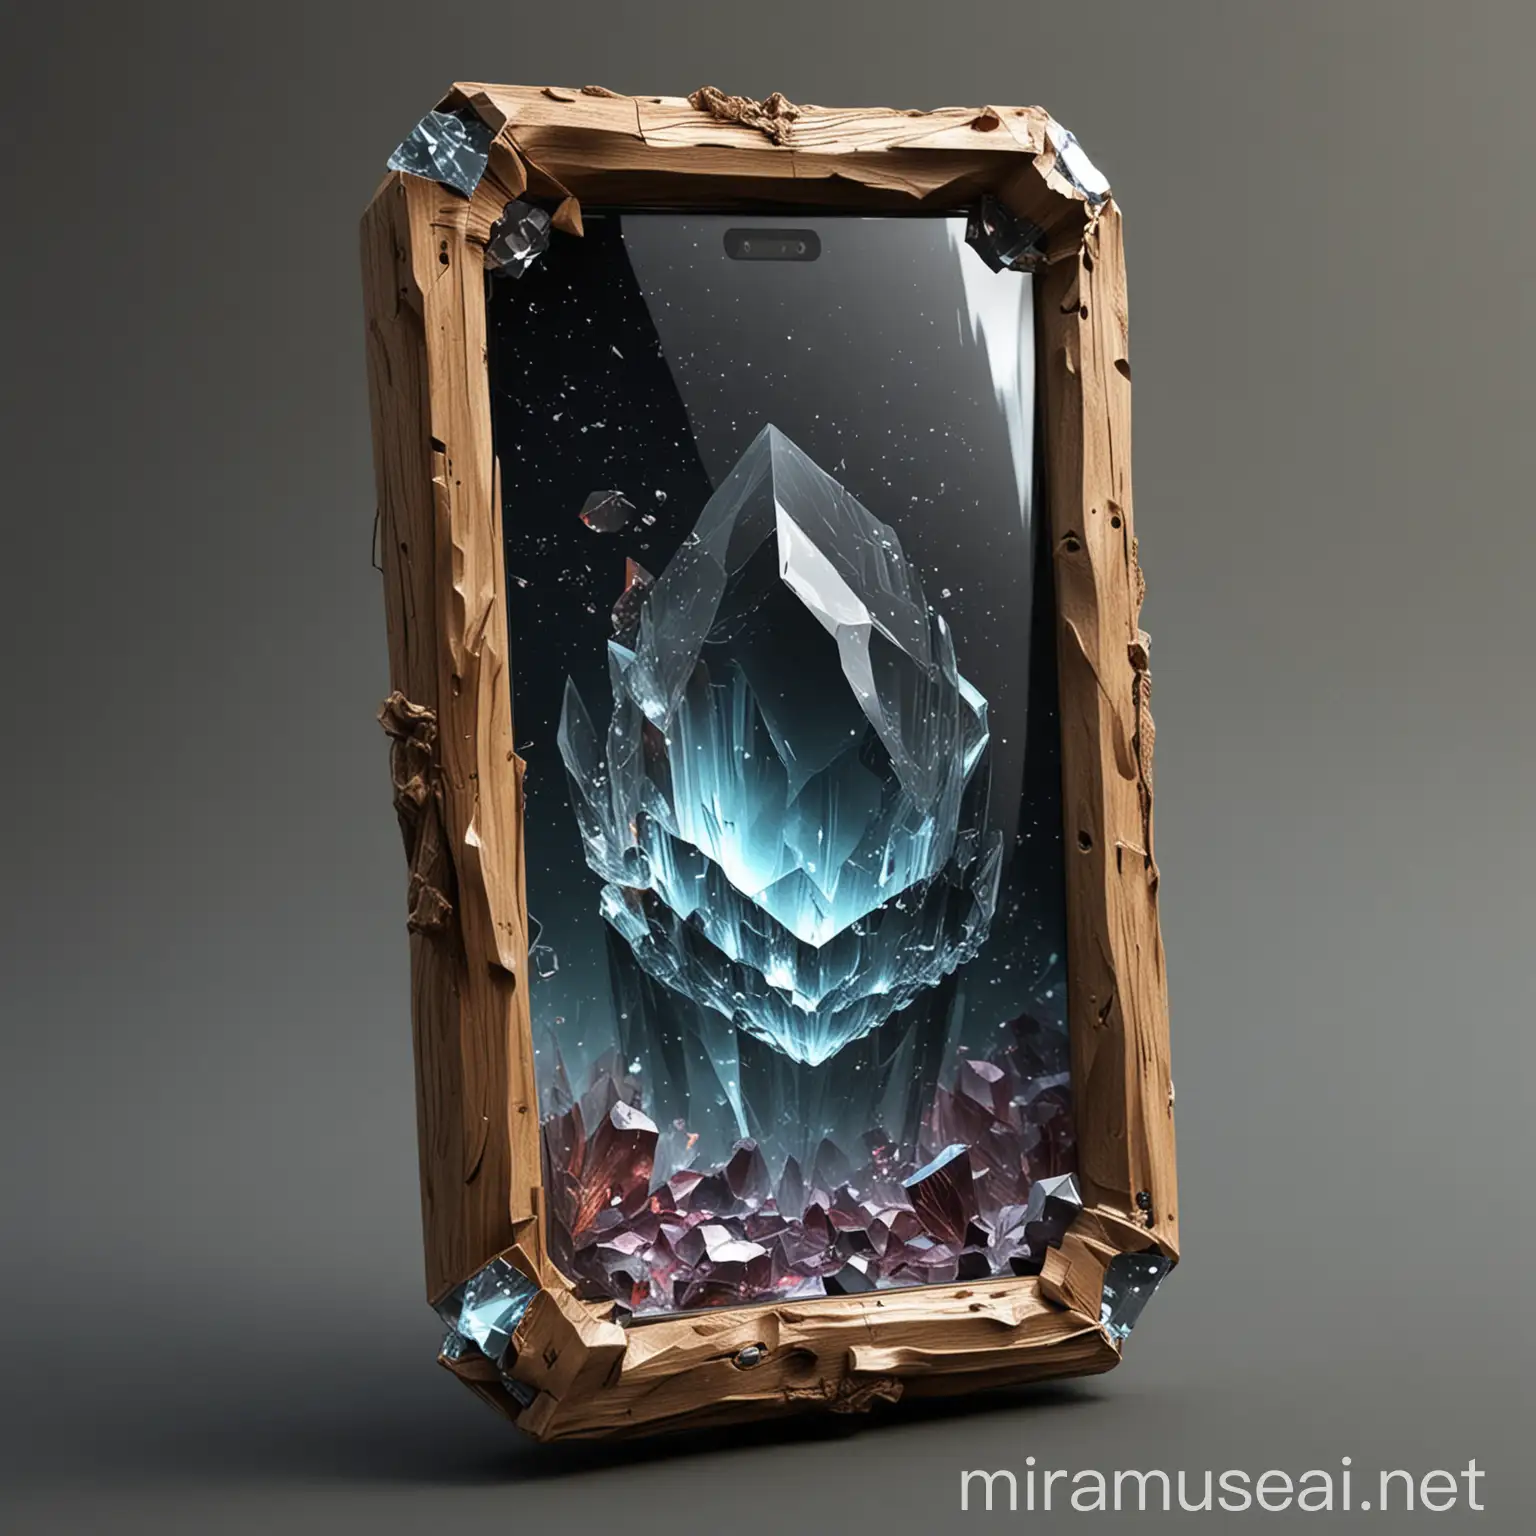 abstract fantasy smartphone that looks like it could be used in a fantasy world, with a wooden frame and a rough, uneven crystal screen